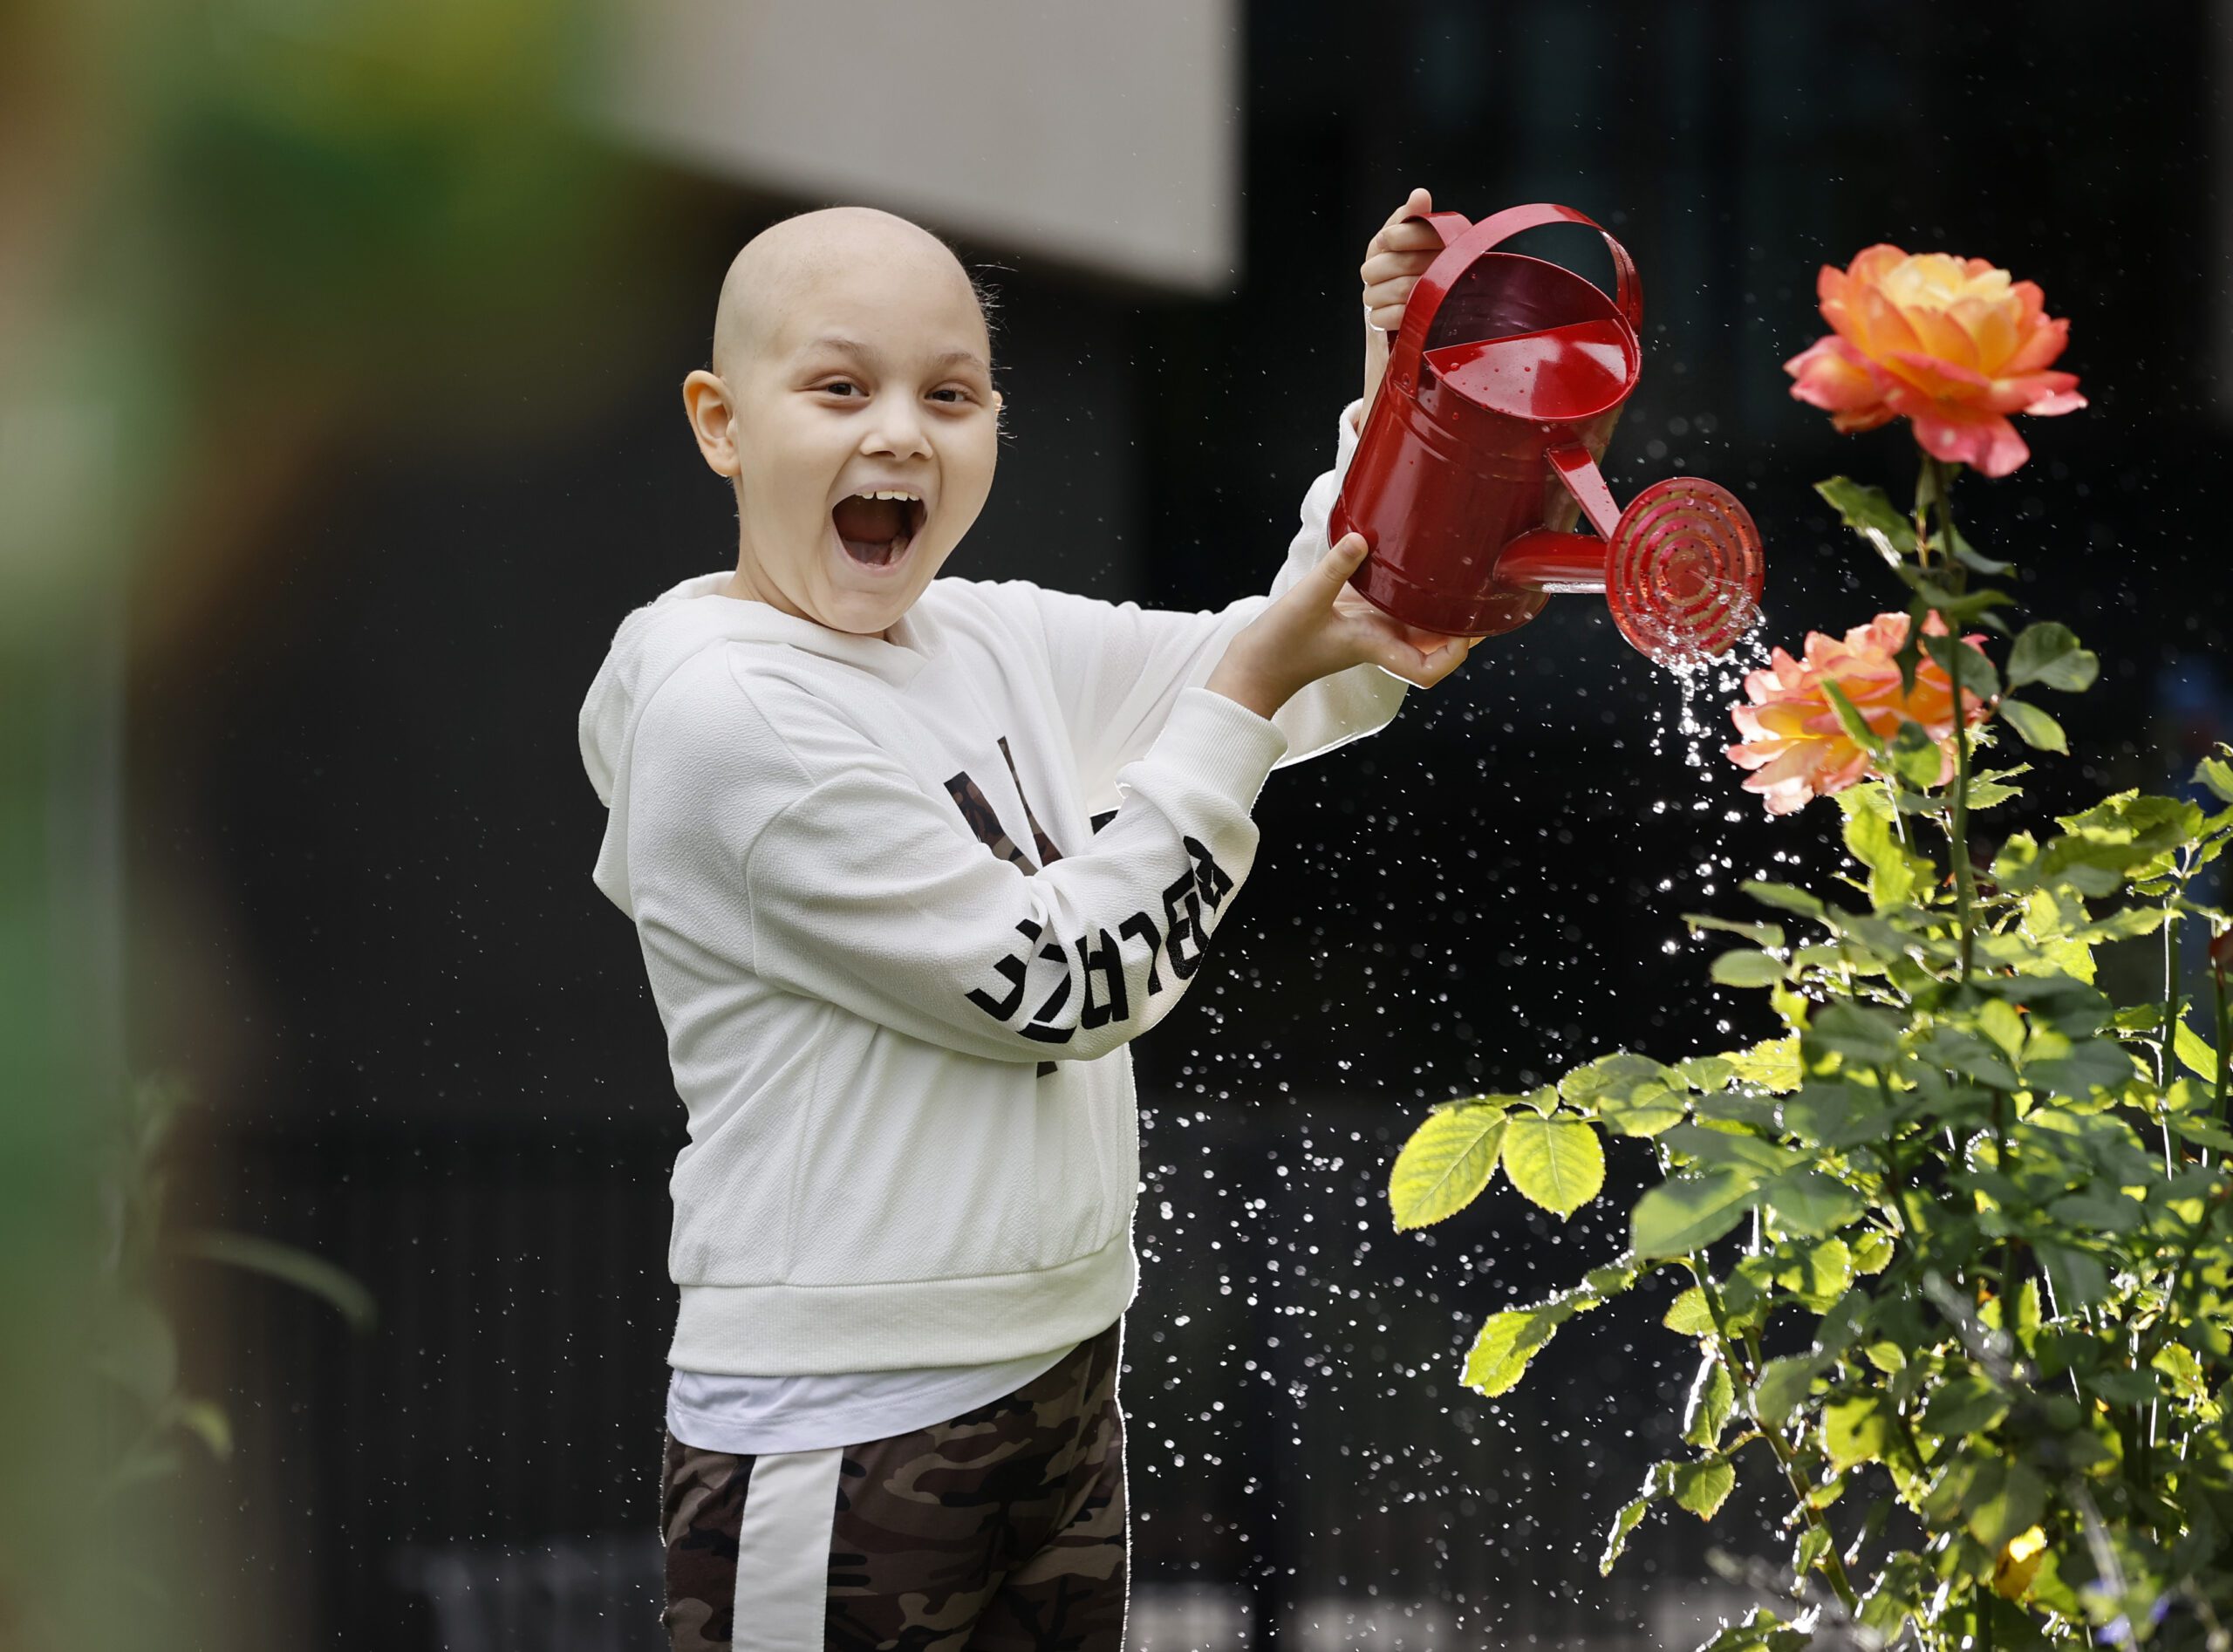 Aliyana watering flowers with a water can. Aliyana is bald for cancer treatment